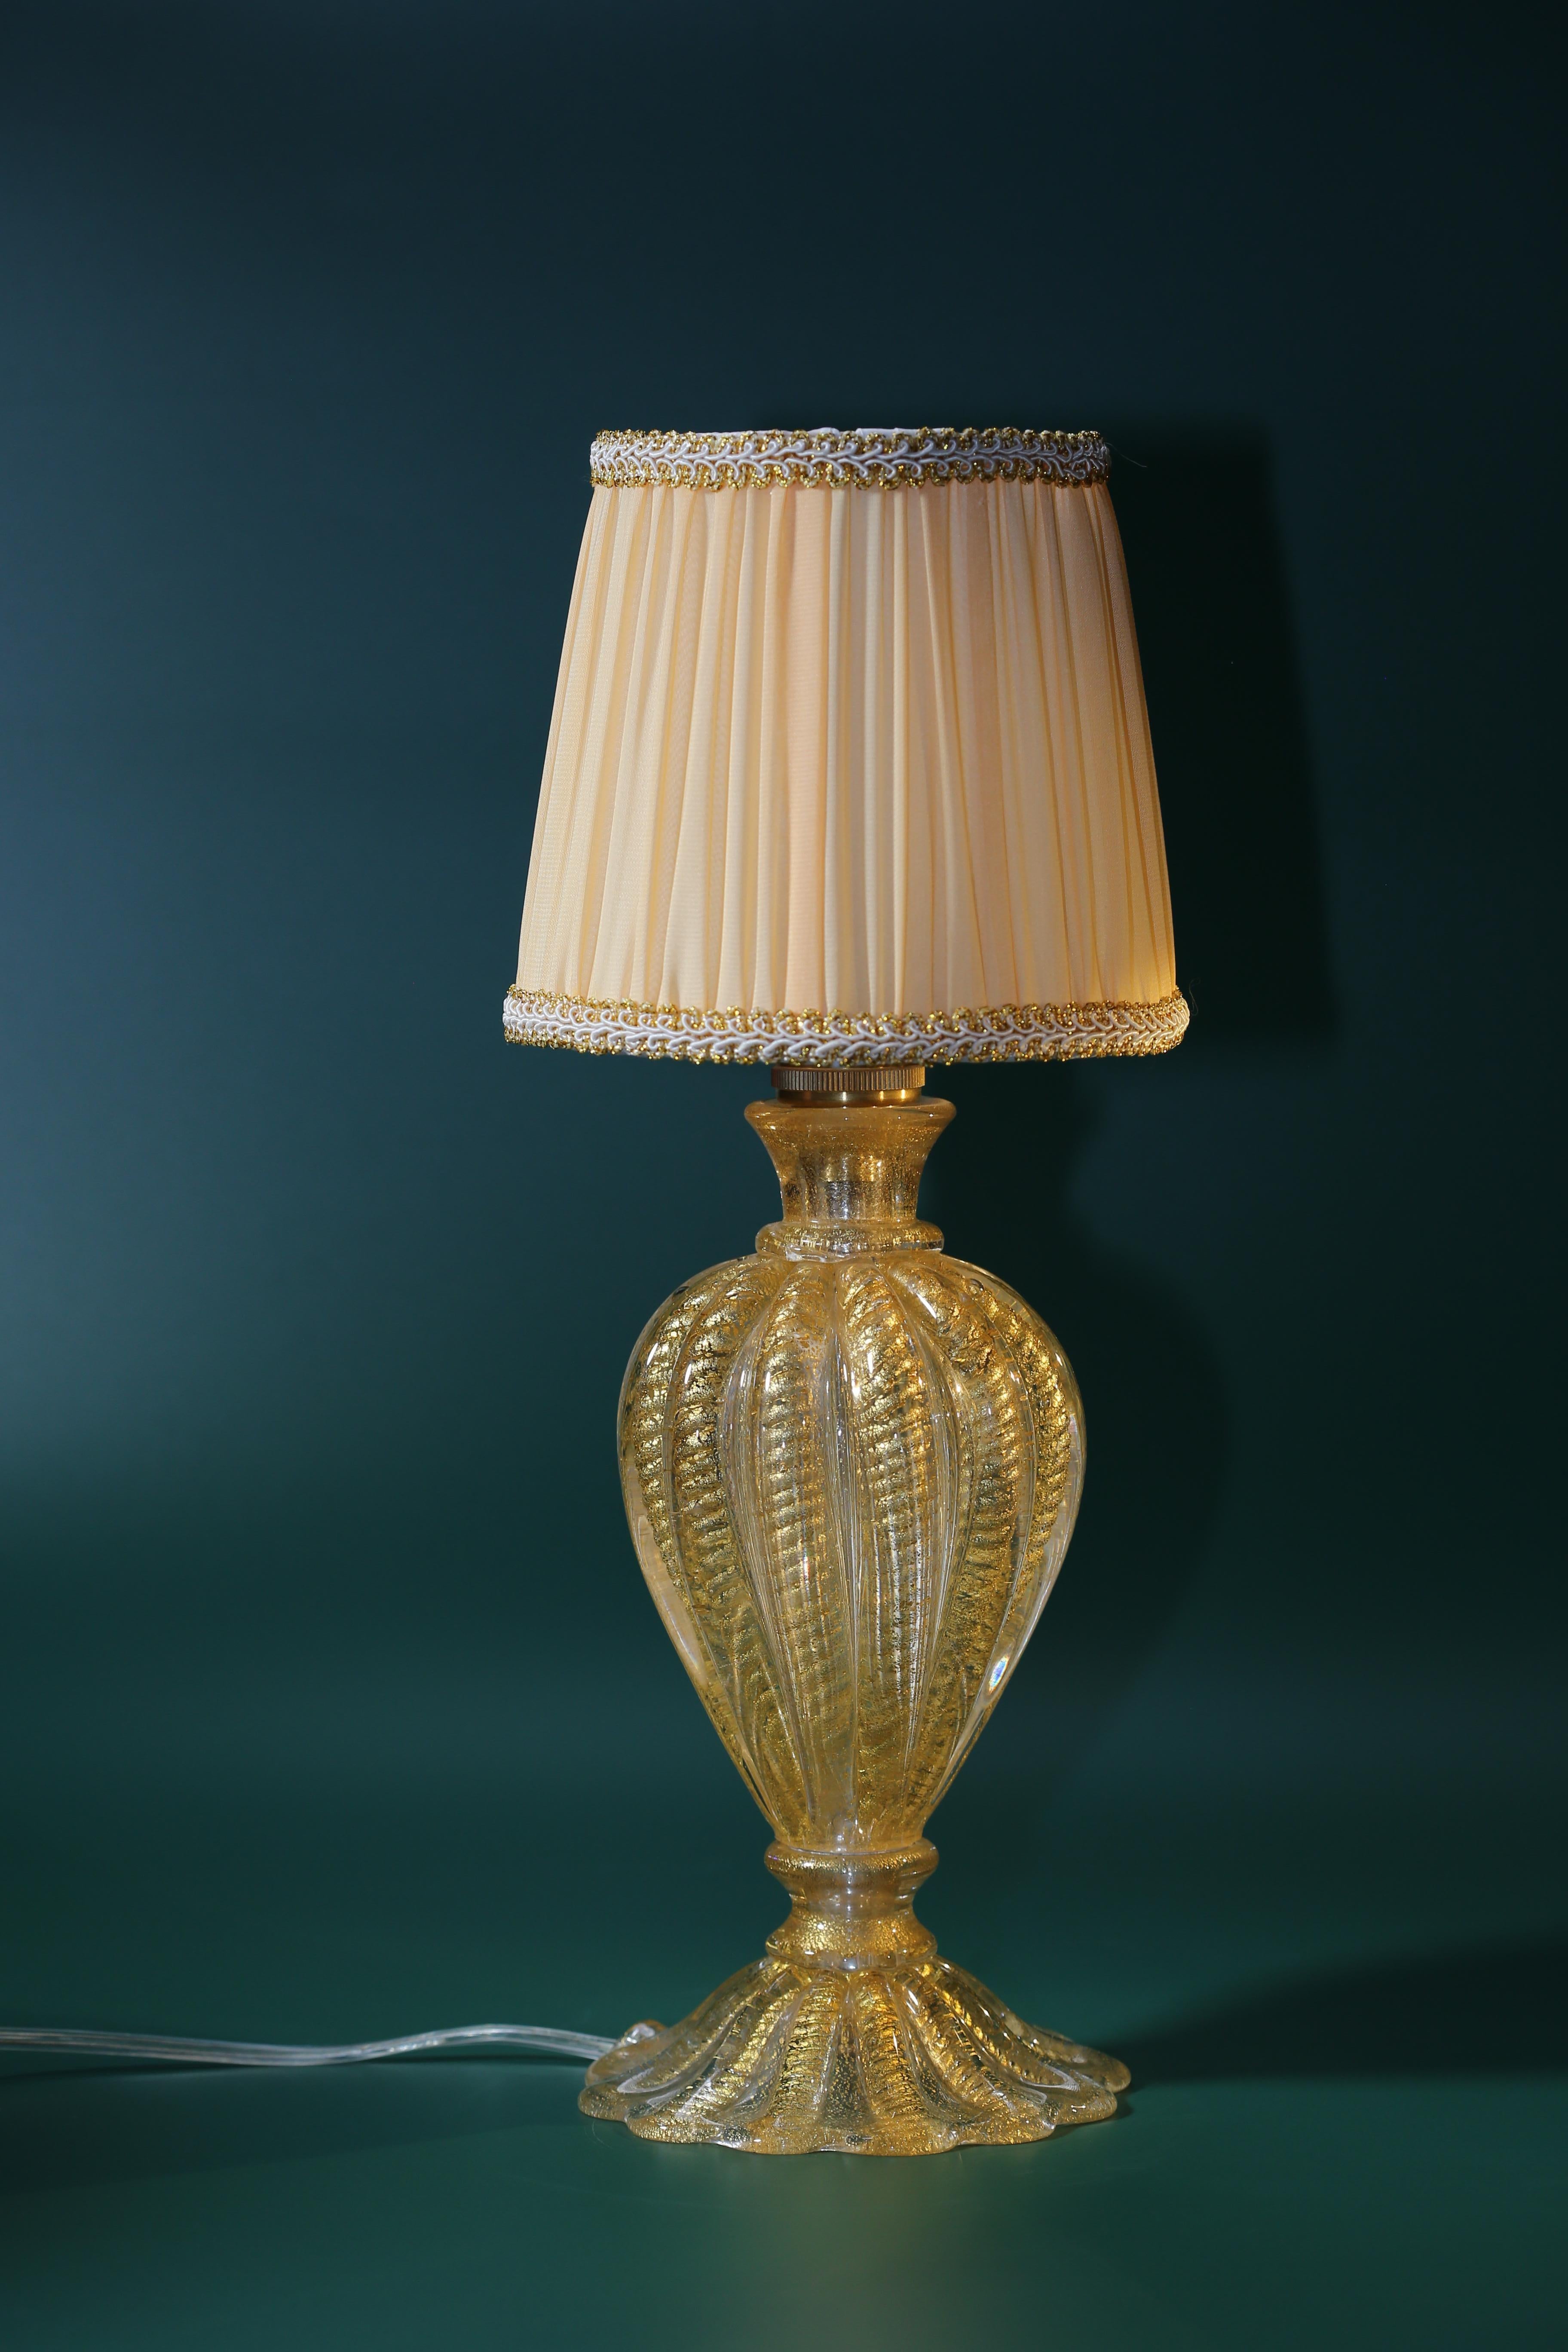 Vintage gold-coloured art lamp made from Murano glass. Made in Italy. New custom made cloth lampshade.